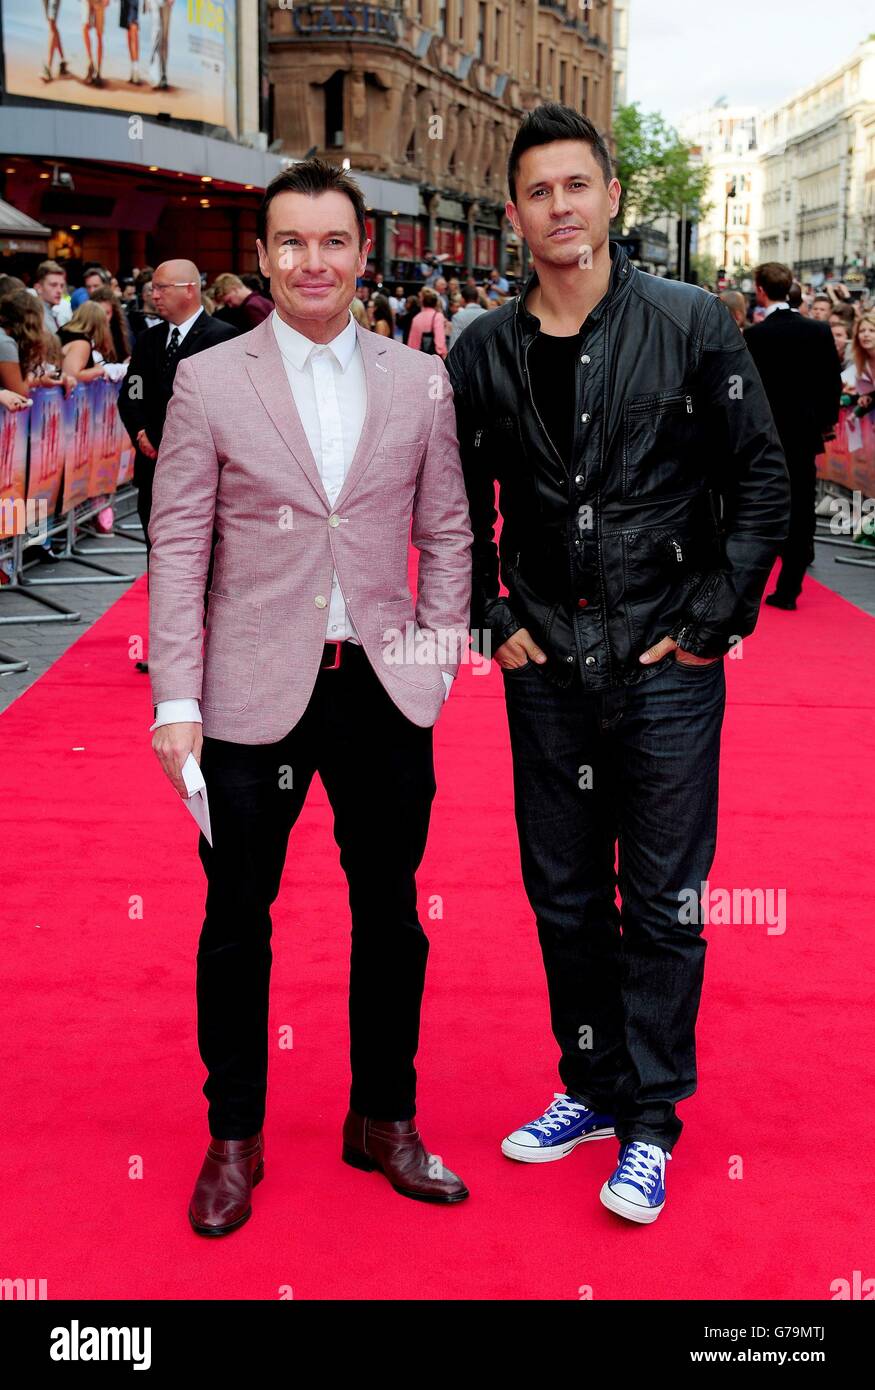 Greg Burns (left) and Jeremy Edwards attending the premiere of new film The Inbetweeners 2 at the Vue Cinema in London. Stock Photo